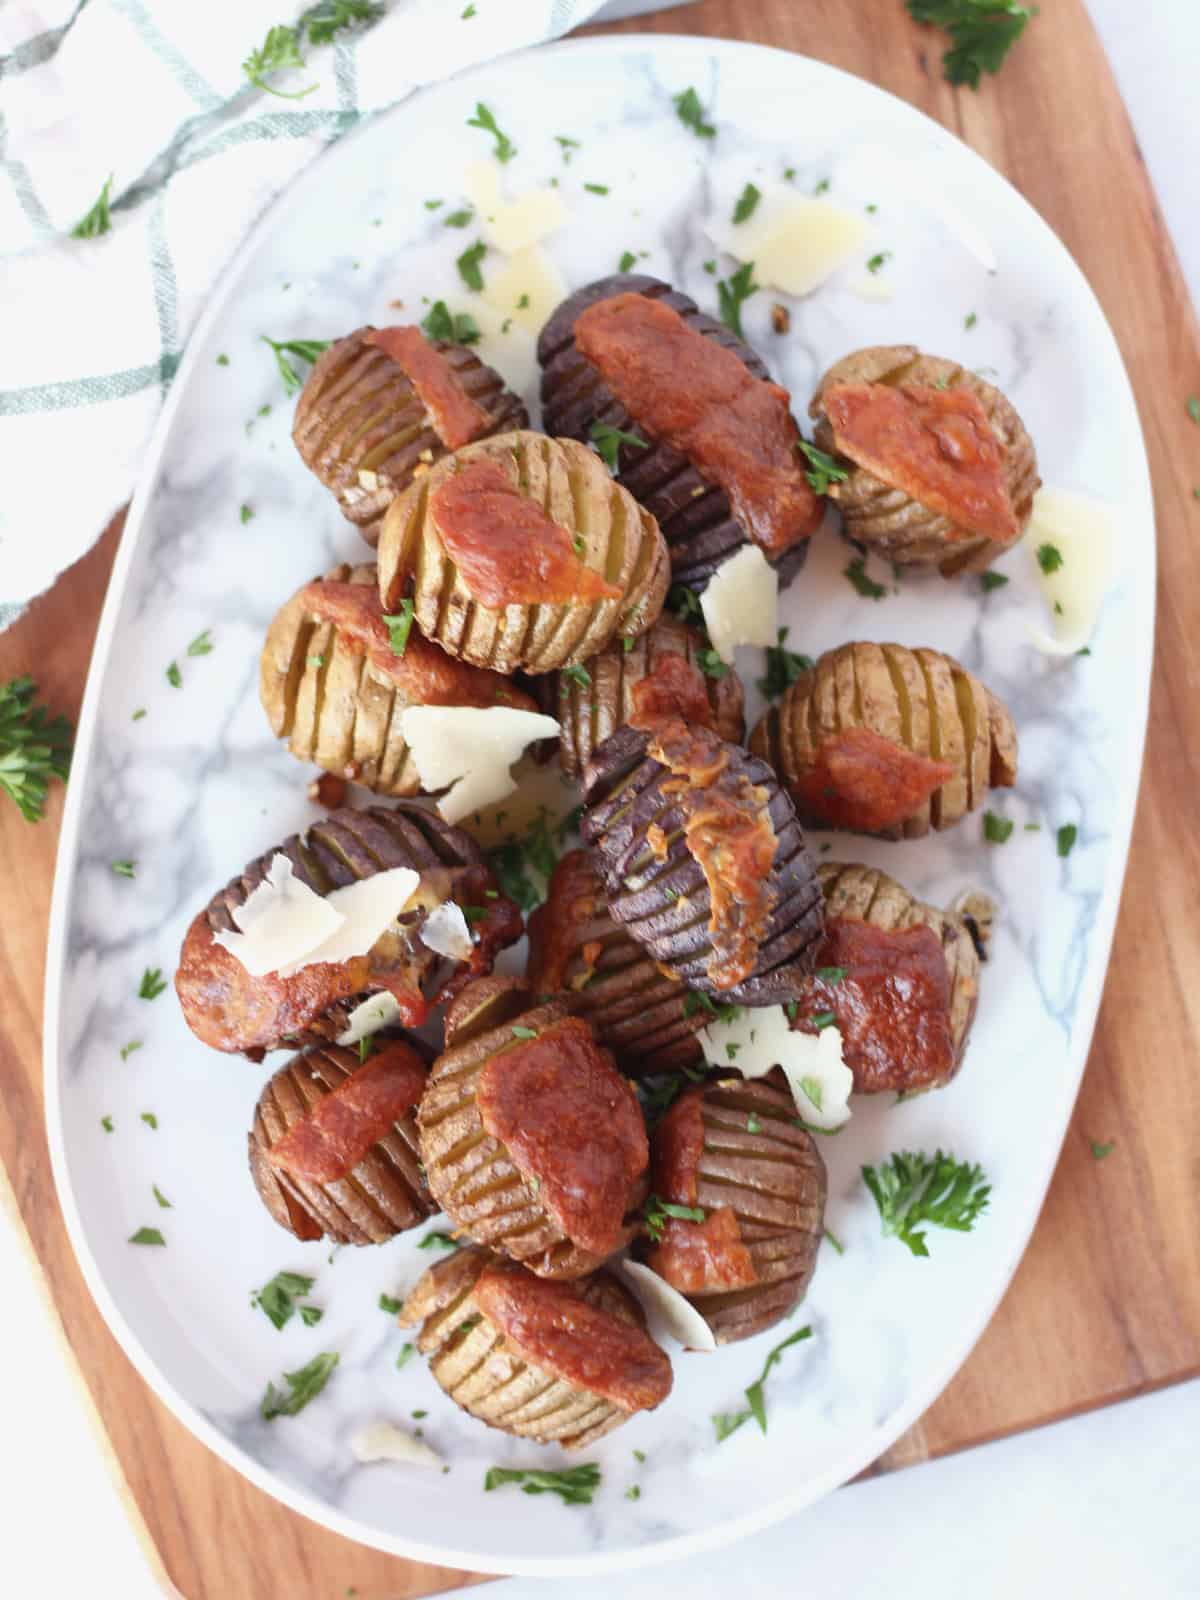 Mini hasselback potatoes on a serving plate topped with parmesan shavings and fresh herbs.